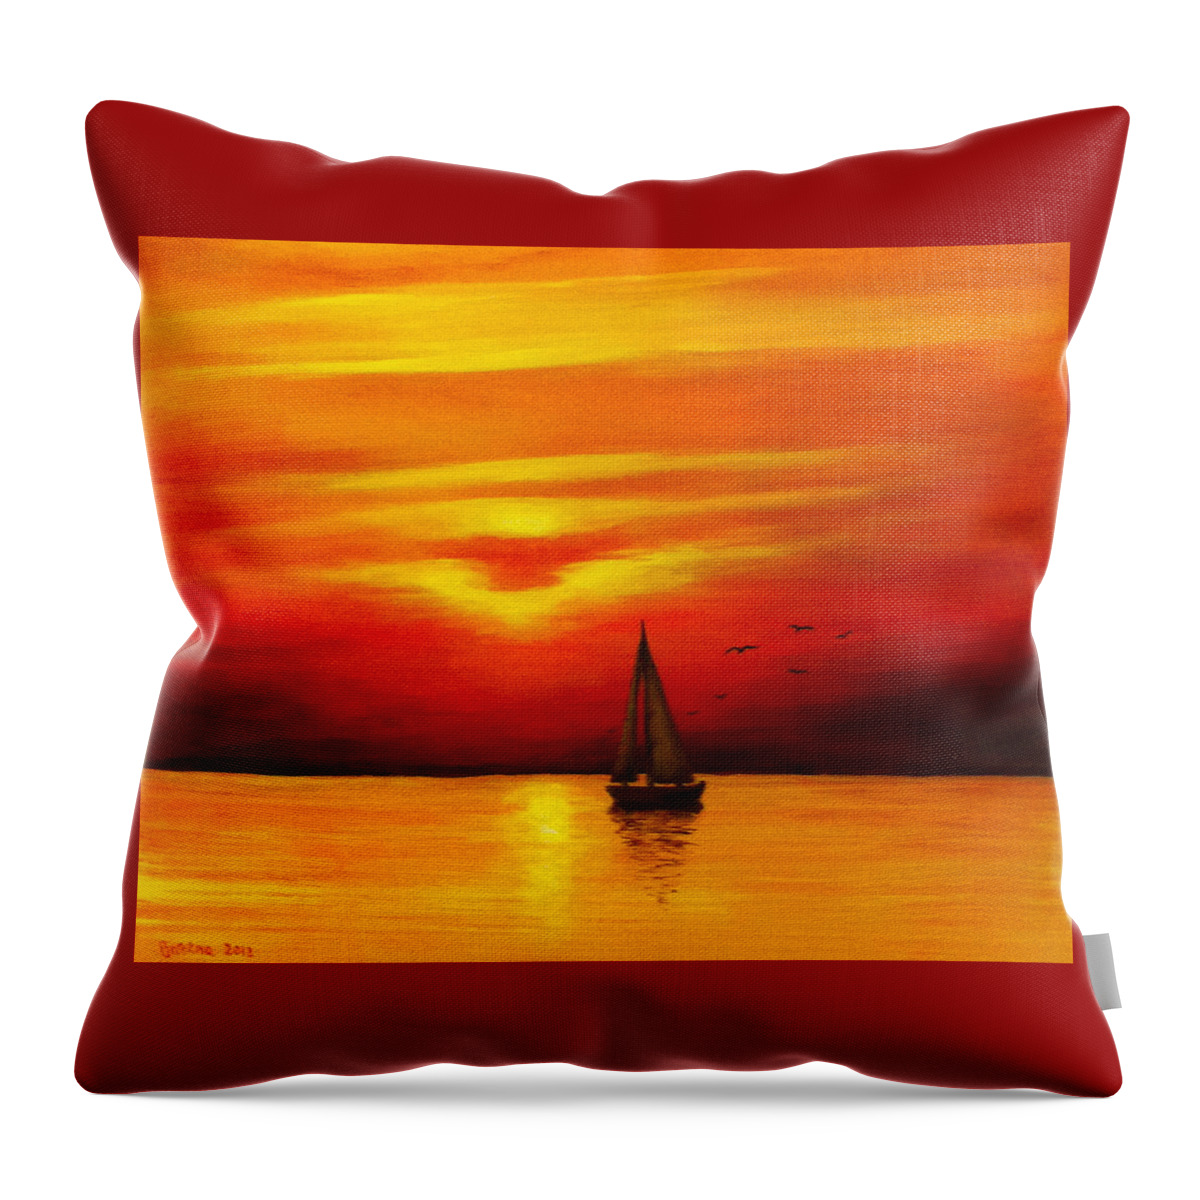 Seascape Throw Pillow featuring the painting Boat in the Sunset by Bozena Zajaczkowska